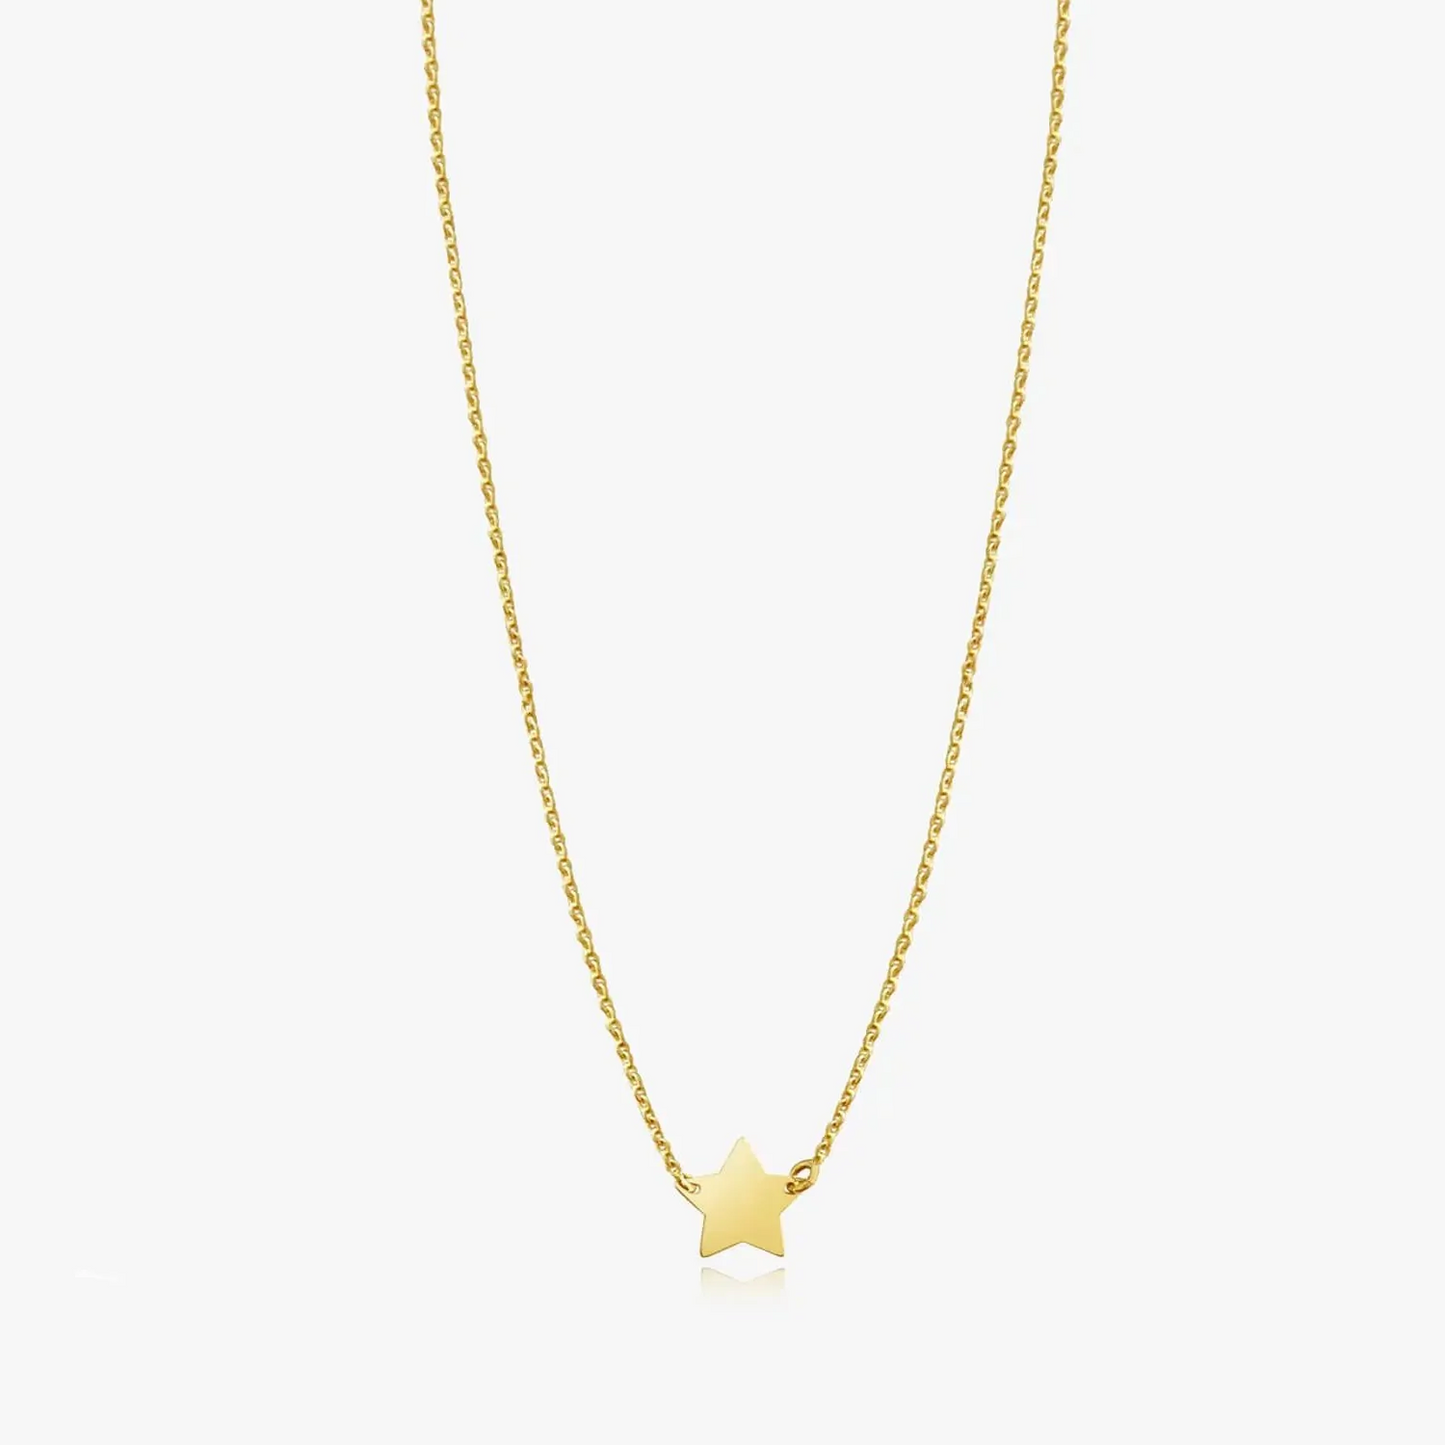 14K Gold Star necklace